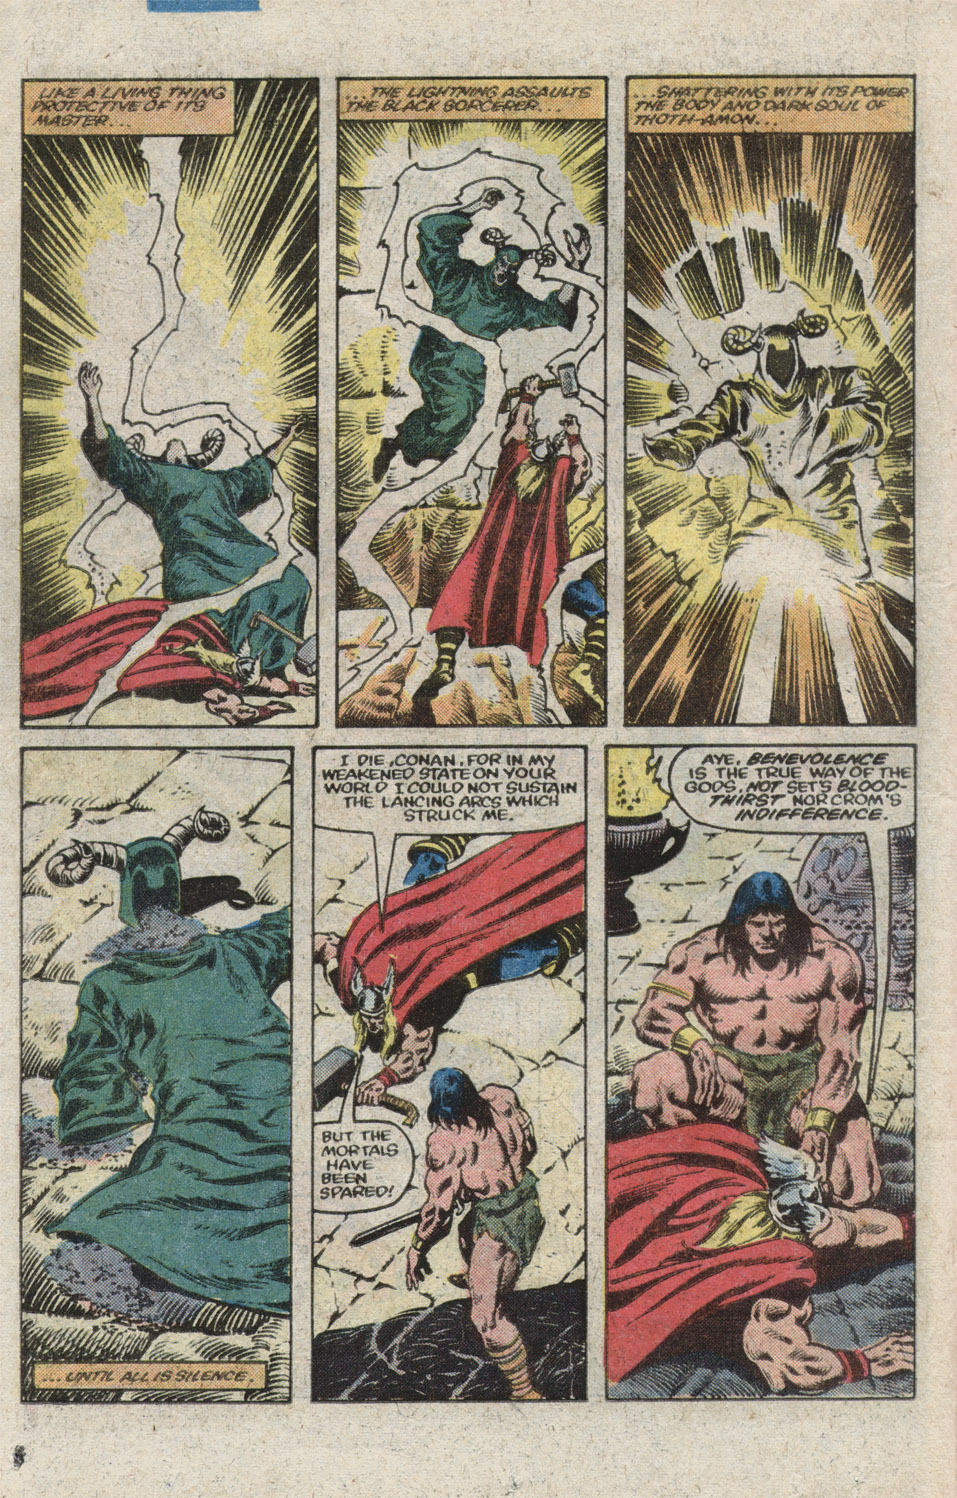 What If? (1977) issue 39 - Thor battled conan - Page 42